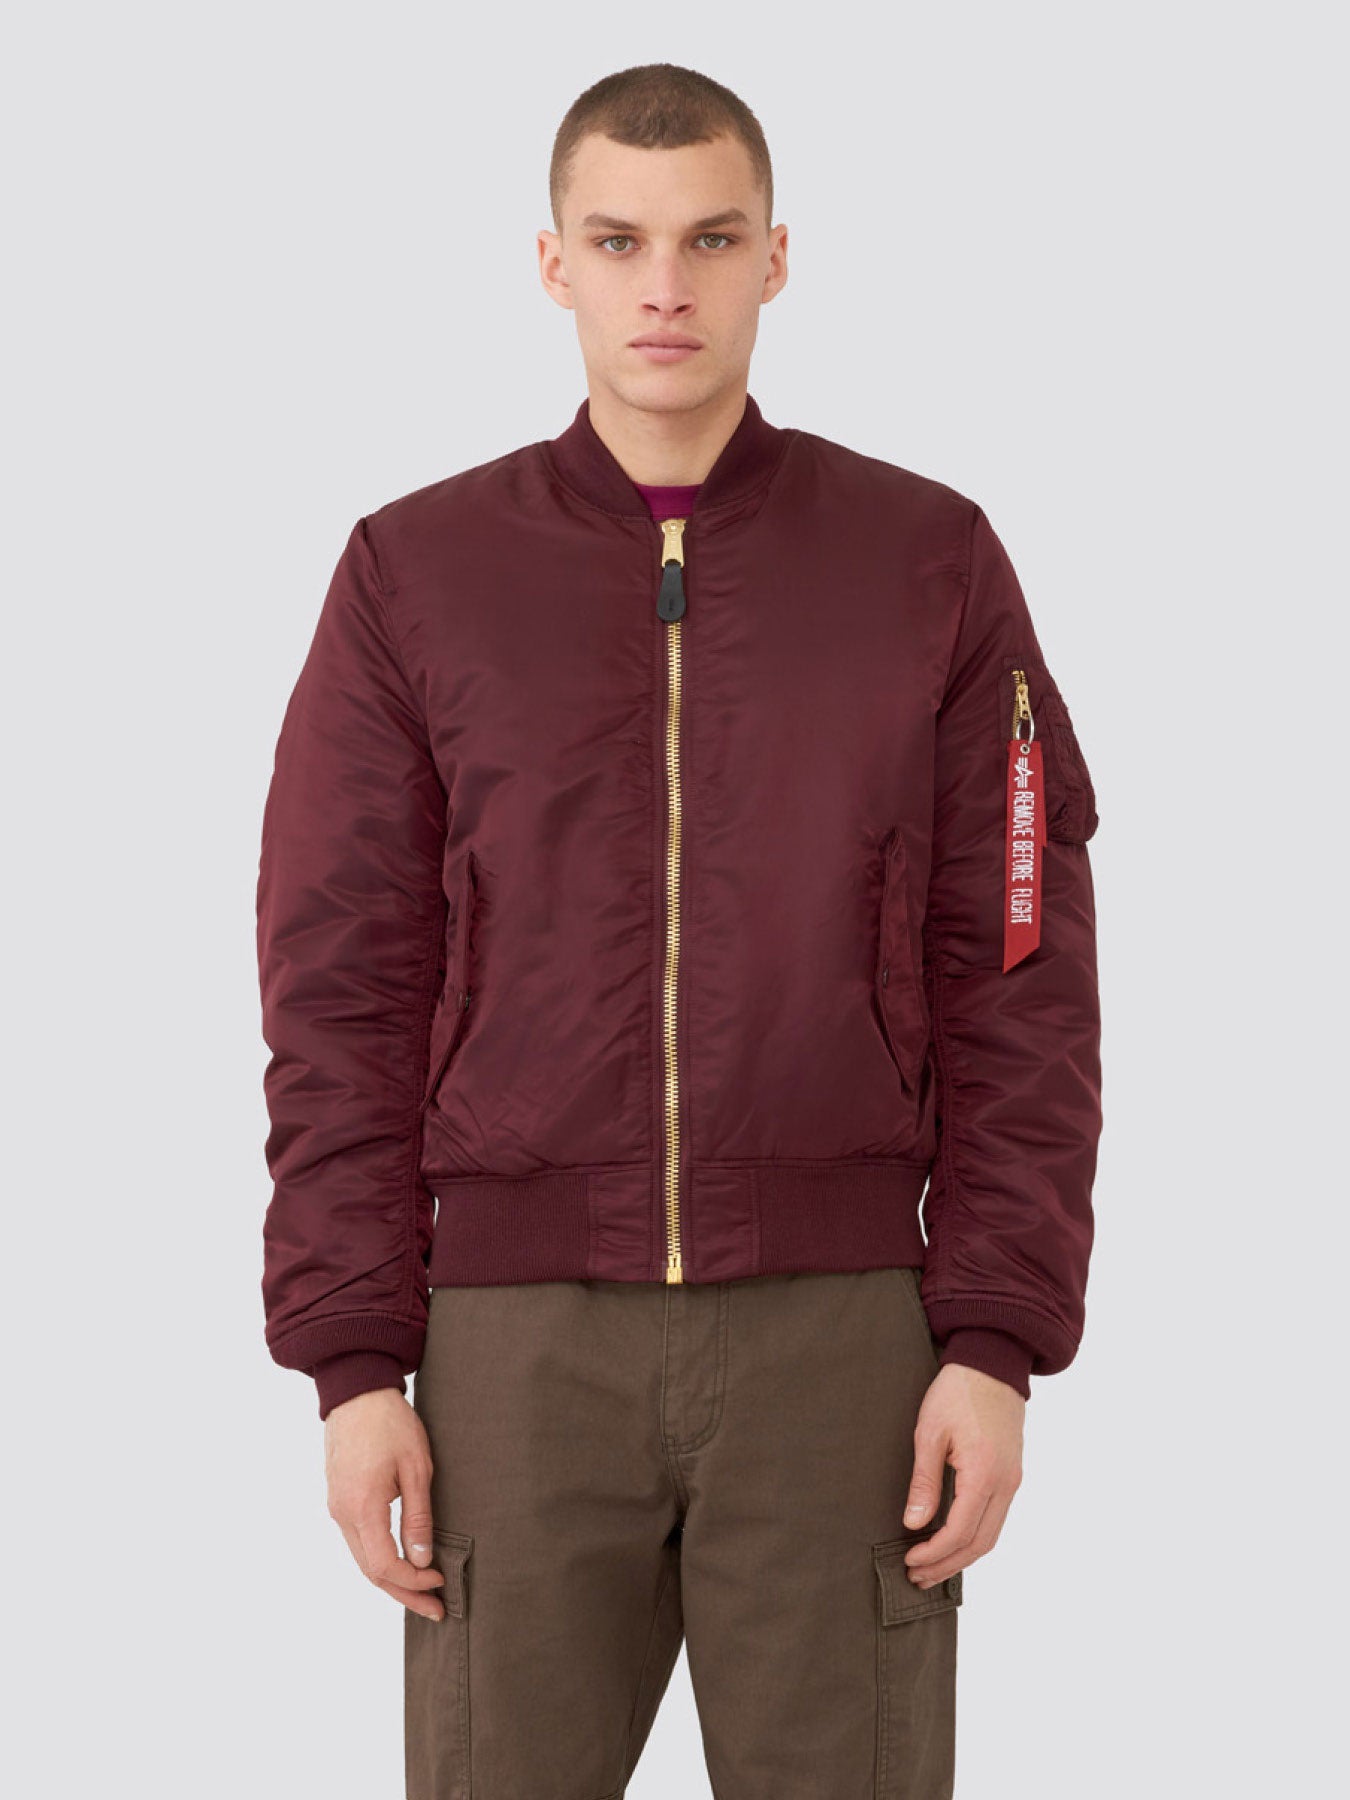 Bomber Hollywood INDUSTRIES ALPHA Posers – Jacket